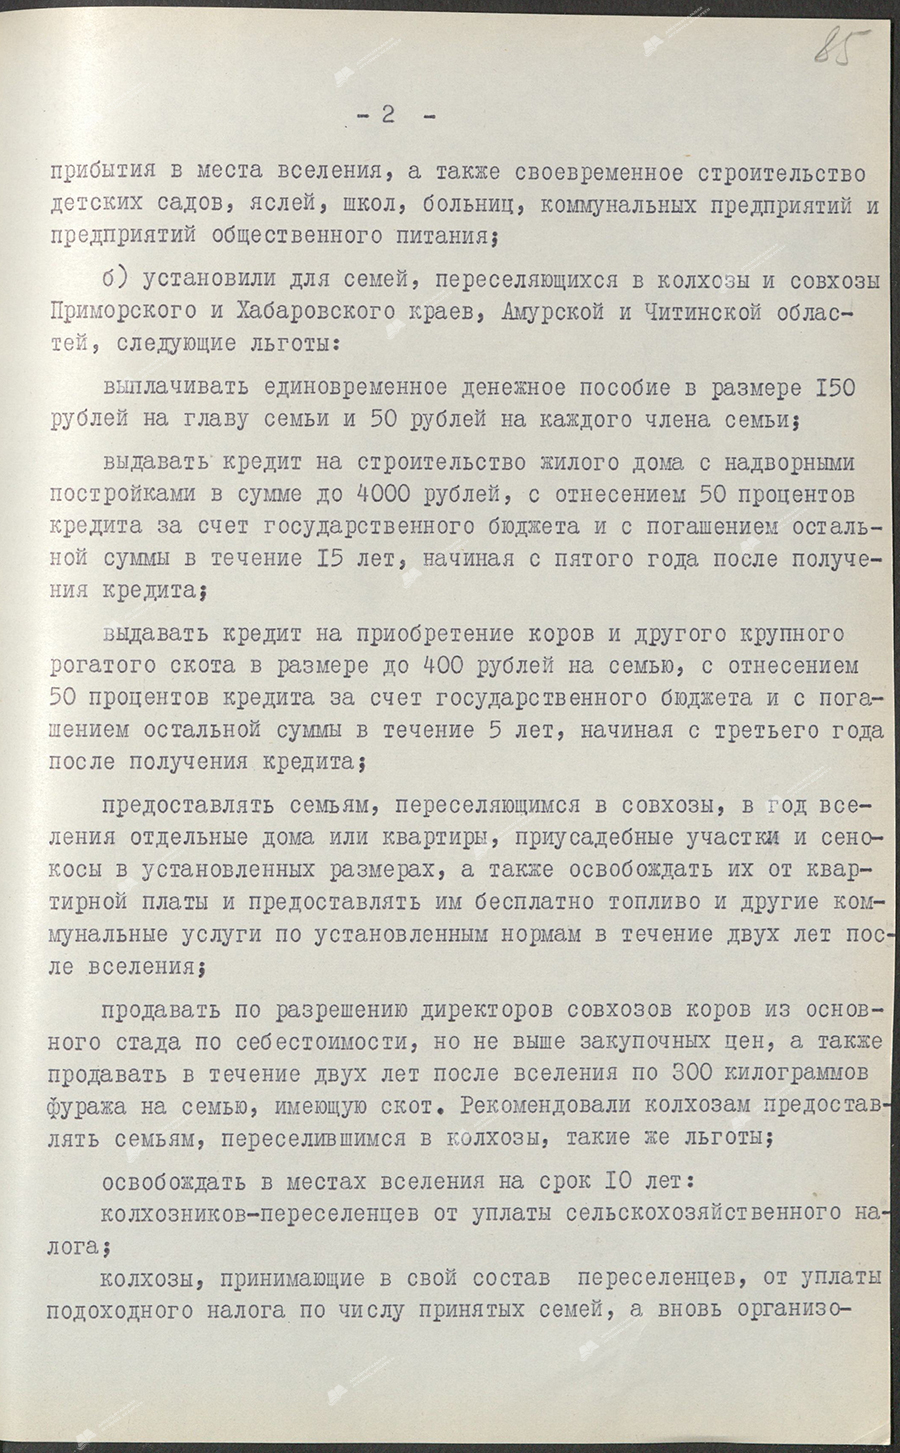 Resolution of the Central Committee of the Communist Party of Belarus and the Council of Ministers of the BSSR «On the plan for the resettlement of families from the BSSR to collective farms and state farms of the Far Eastern economic region and the Chita region»-стр. 1